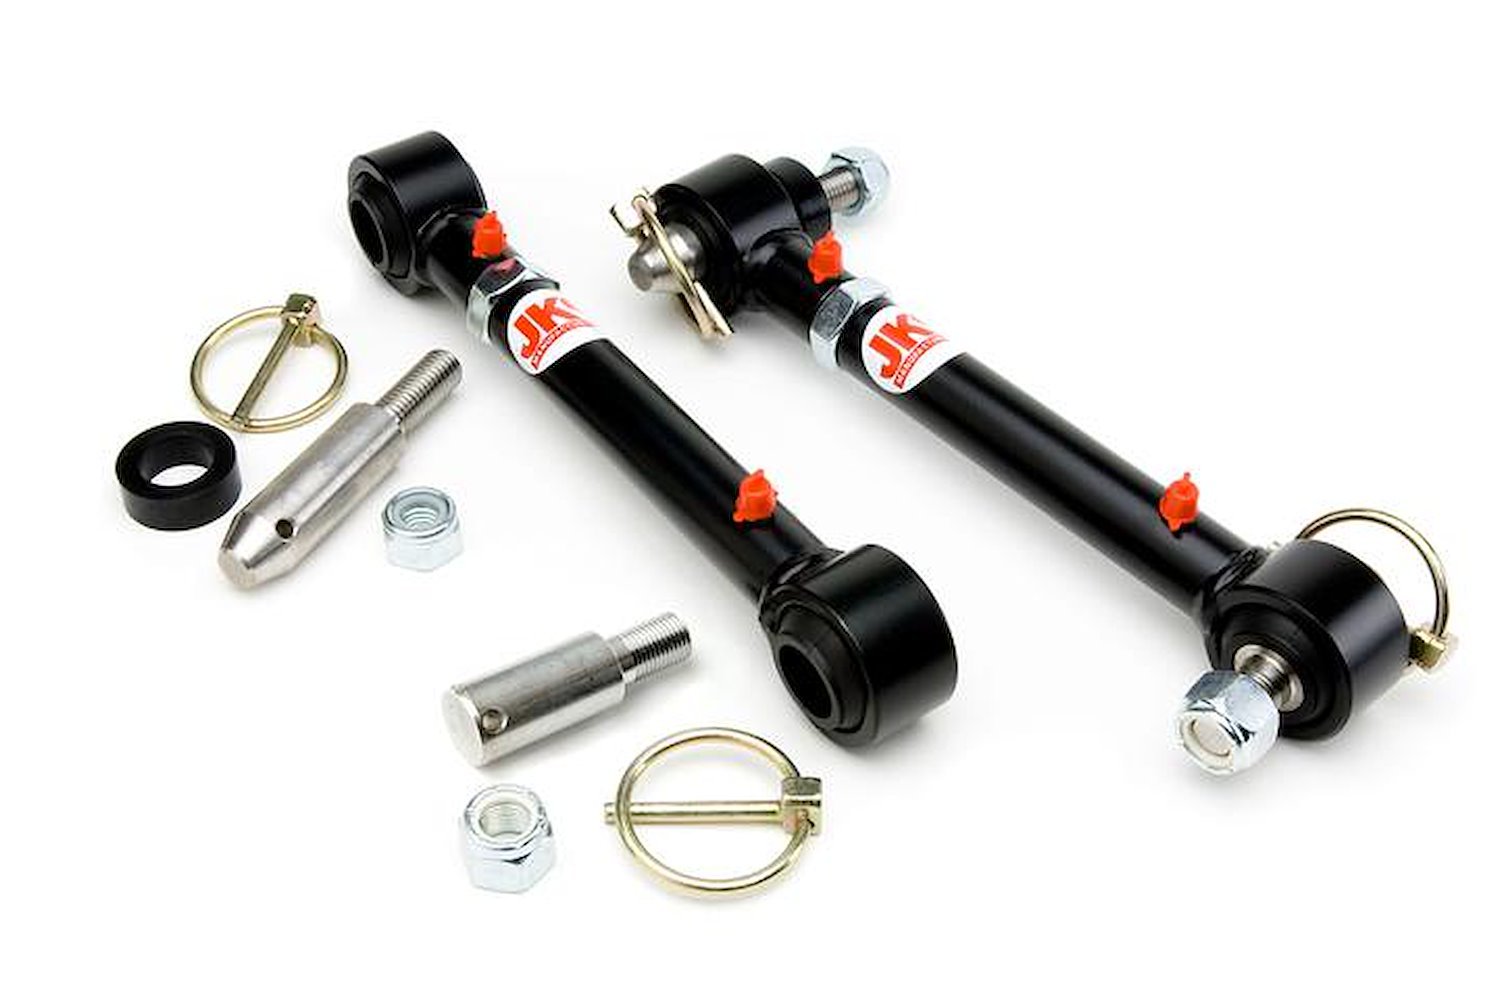 2030 Quicker Disconnect Sway Bar Links for 2007-2018 Jeep Wrangler JK